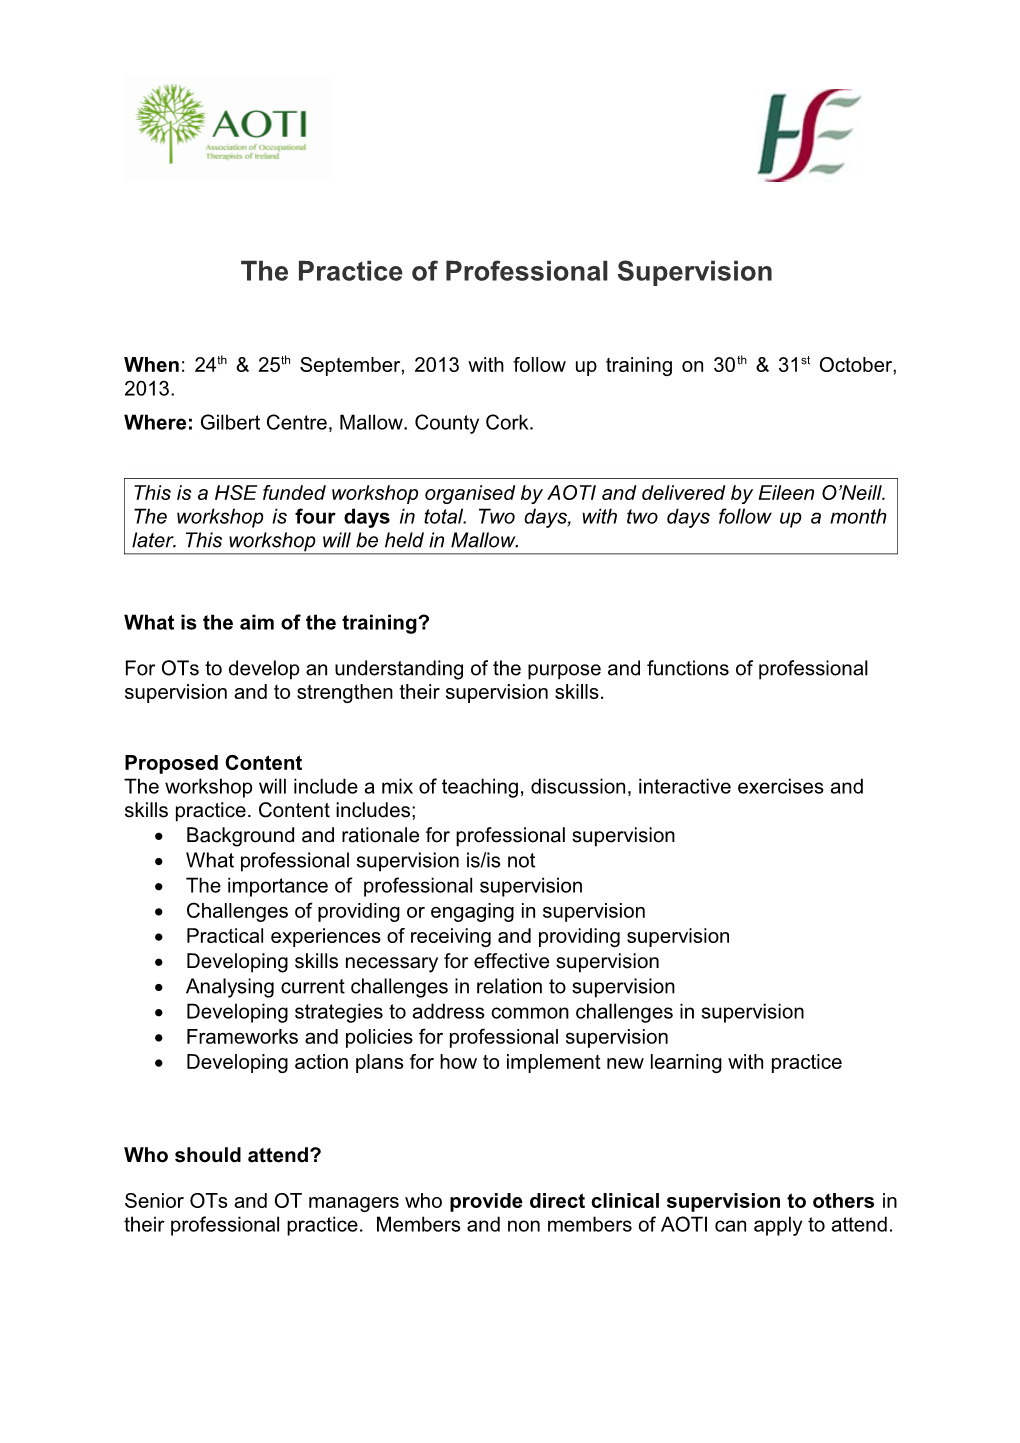 The Practice of Professional Supervision